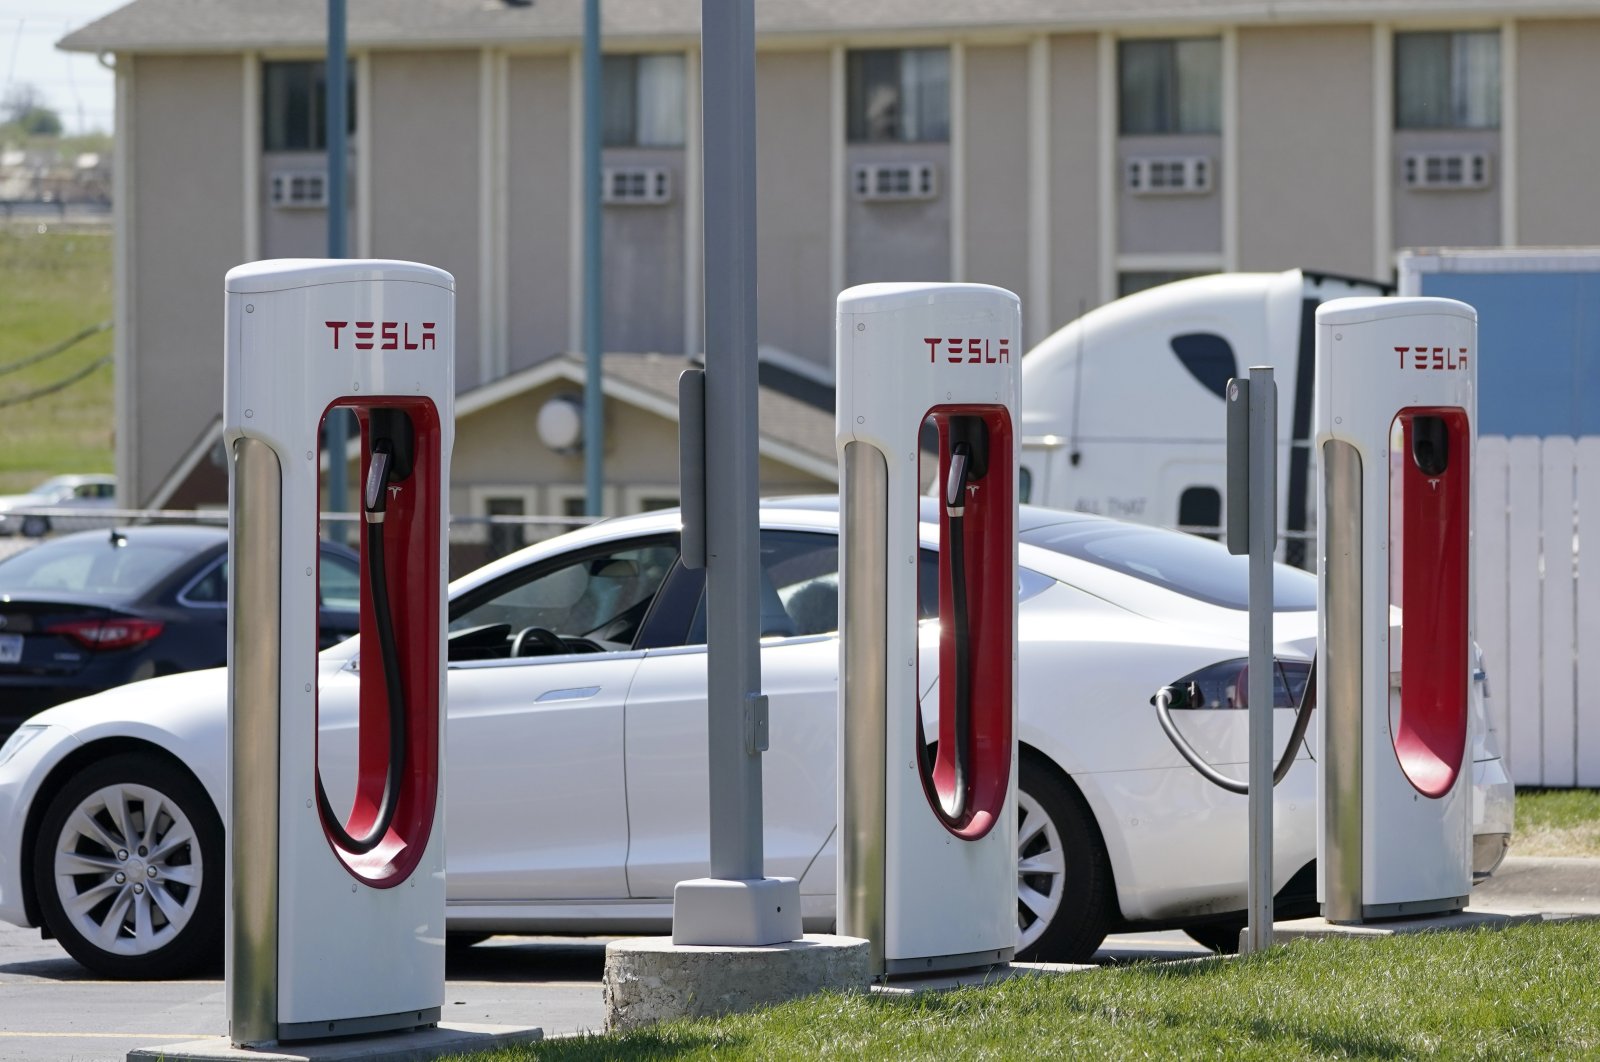 A Tesla charges at a station in Topeka, Kansas, U.S., April 5, 2021. (AP Photo)